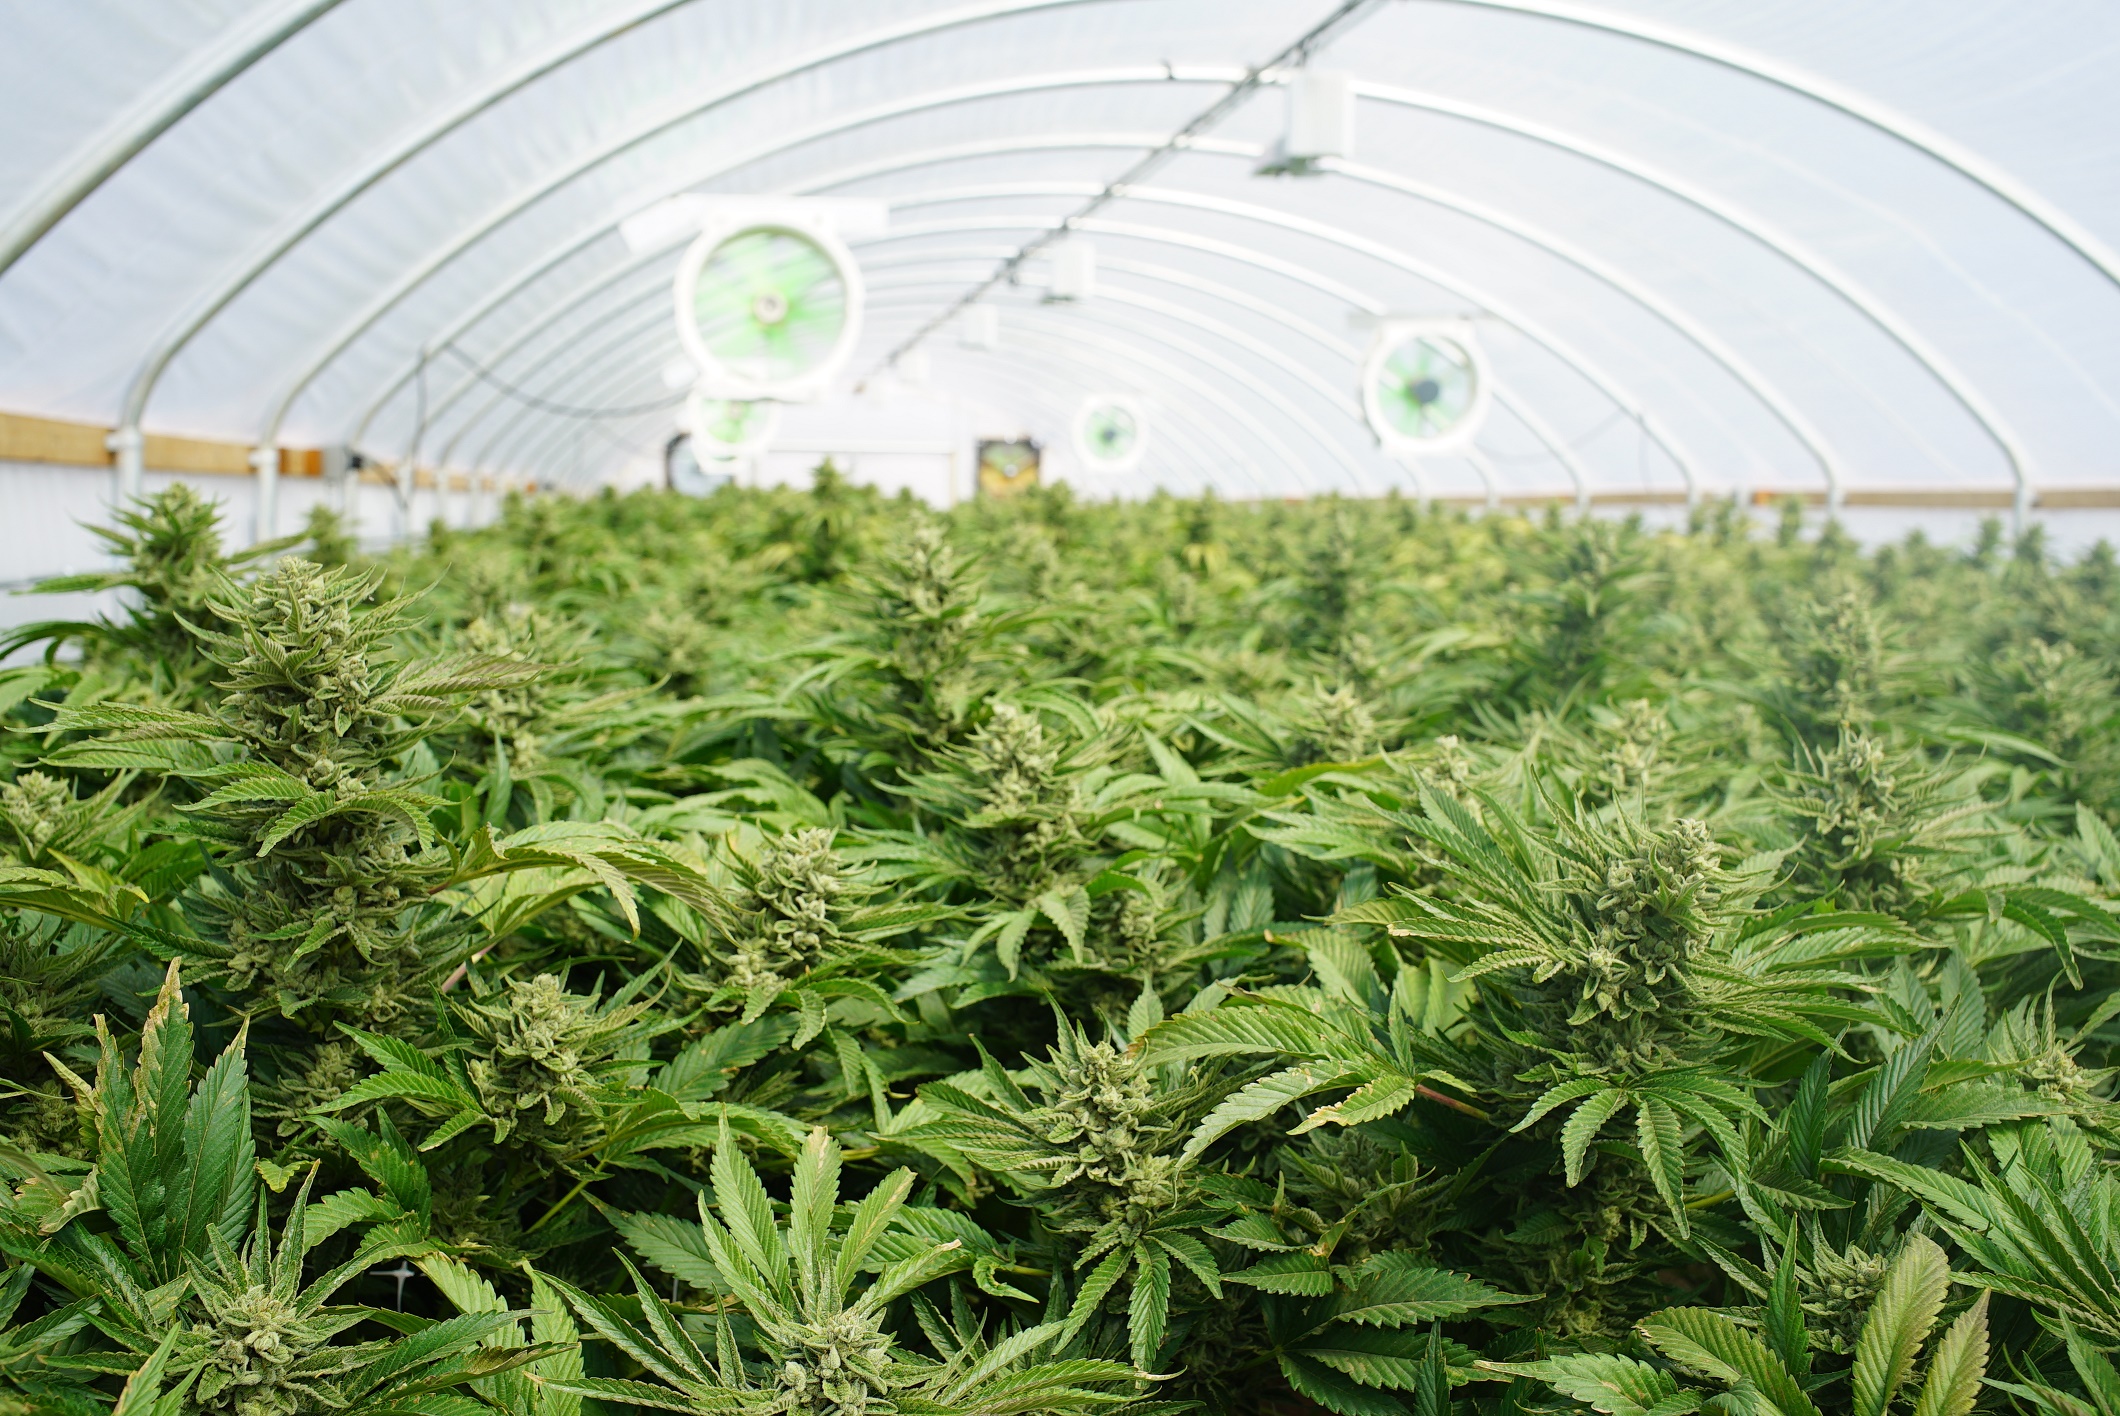 Should HEXO Corp. (TSX:HEXO) or Aurora Cannabis Inc. (TSX:ACB) Be in Your Weed Stock Portfolio?